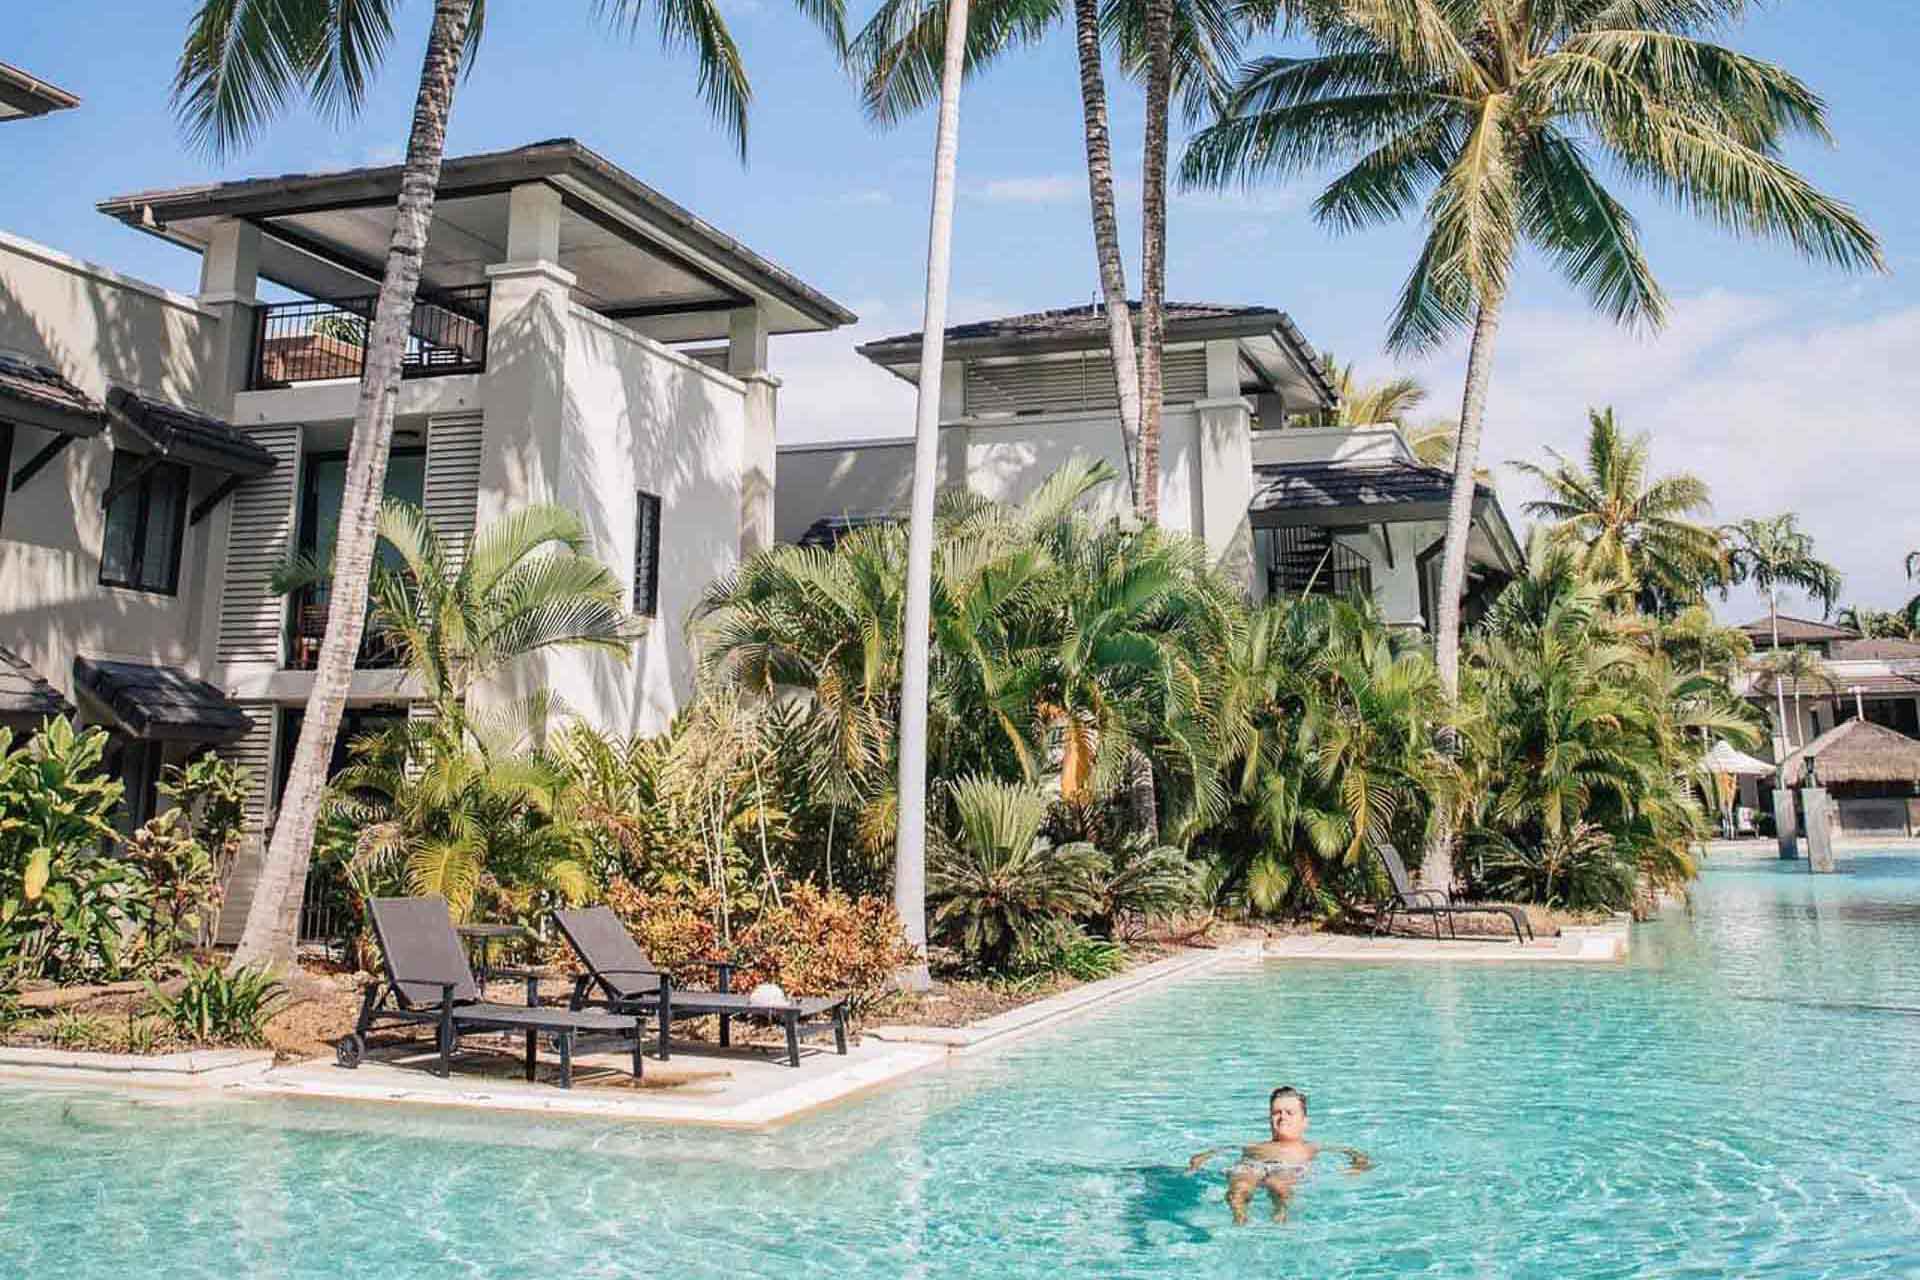 where to stay in port douglas, best places to stay in port douglas, luxury accommodation in port douglas